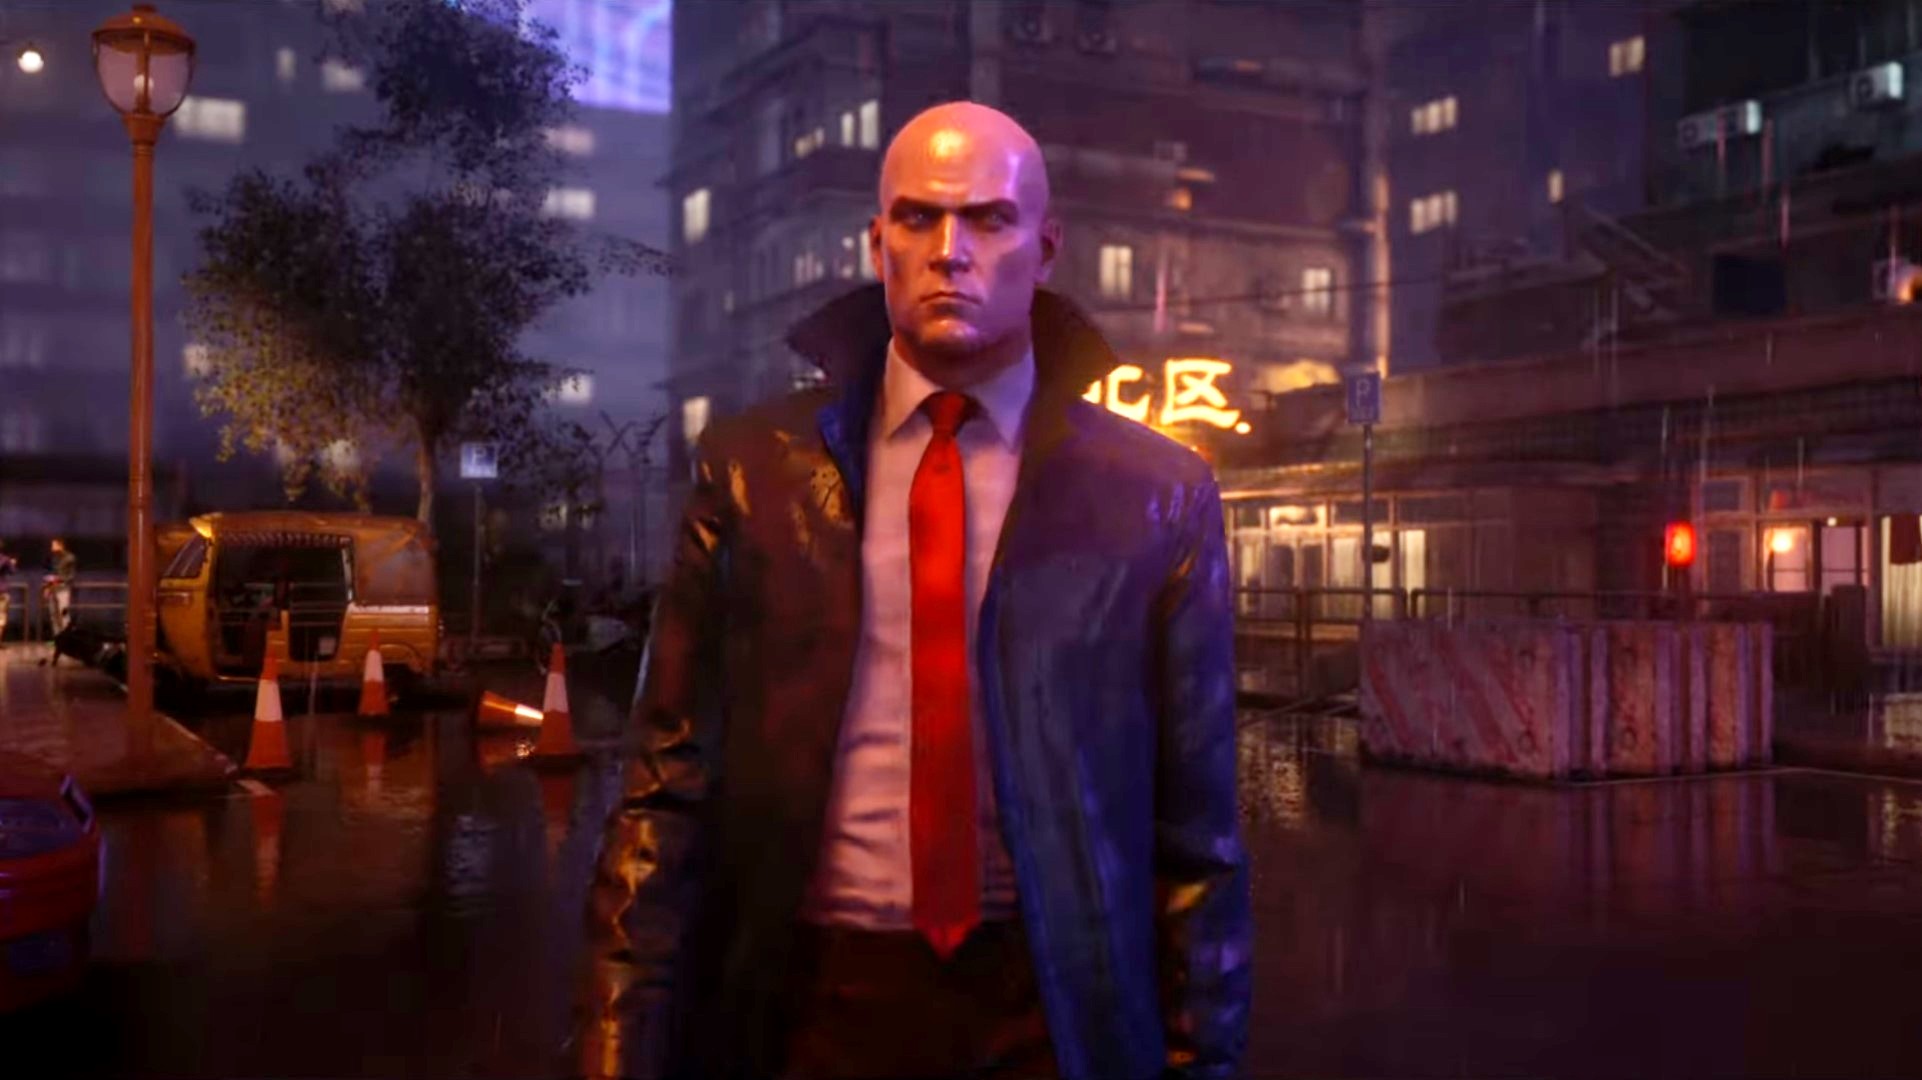 Hitman Freelancer puts the assassination planning into your hands